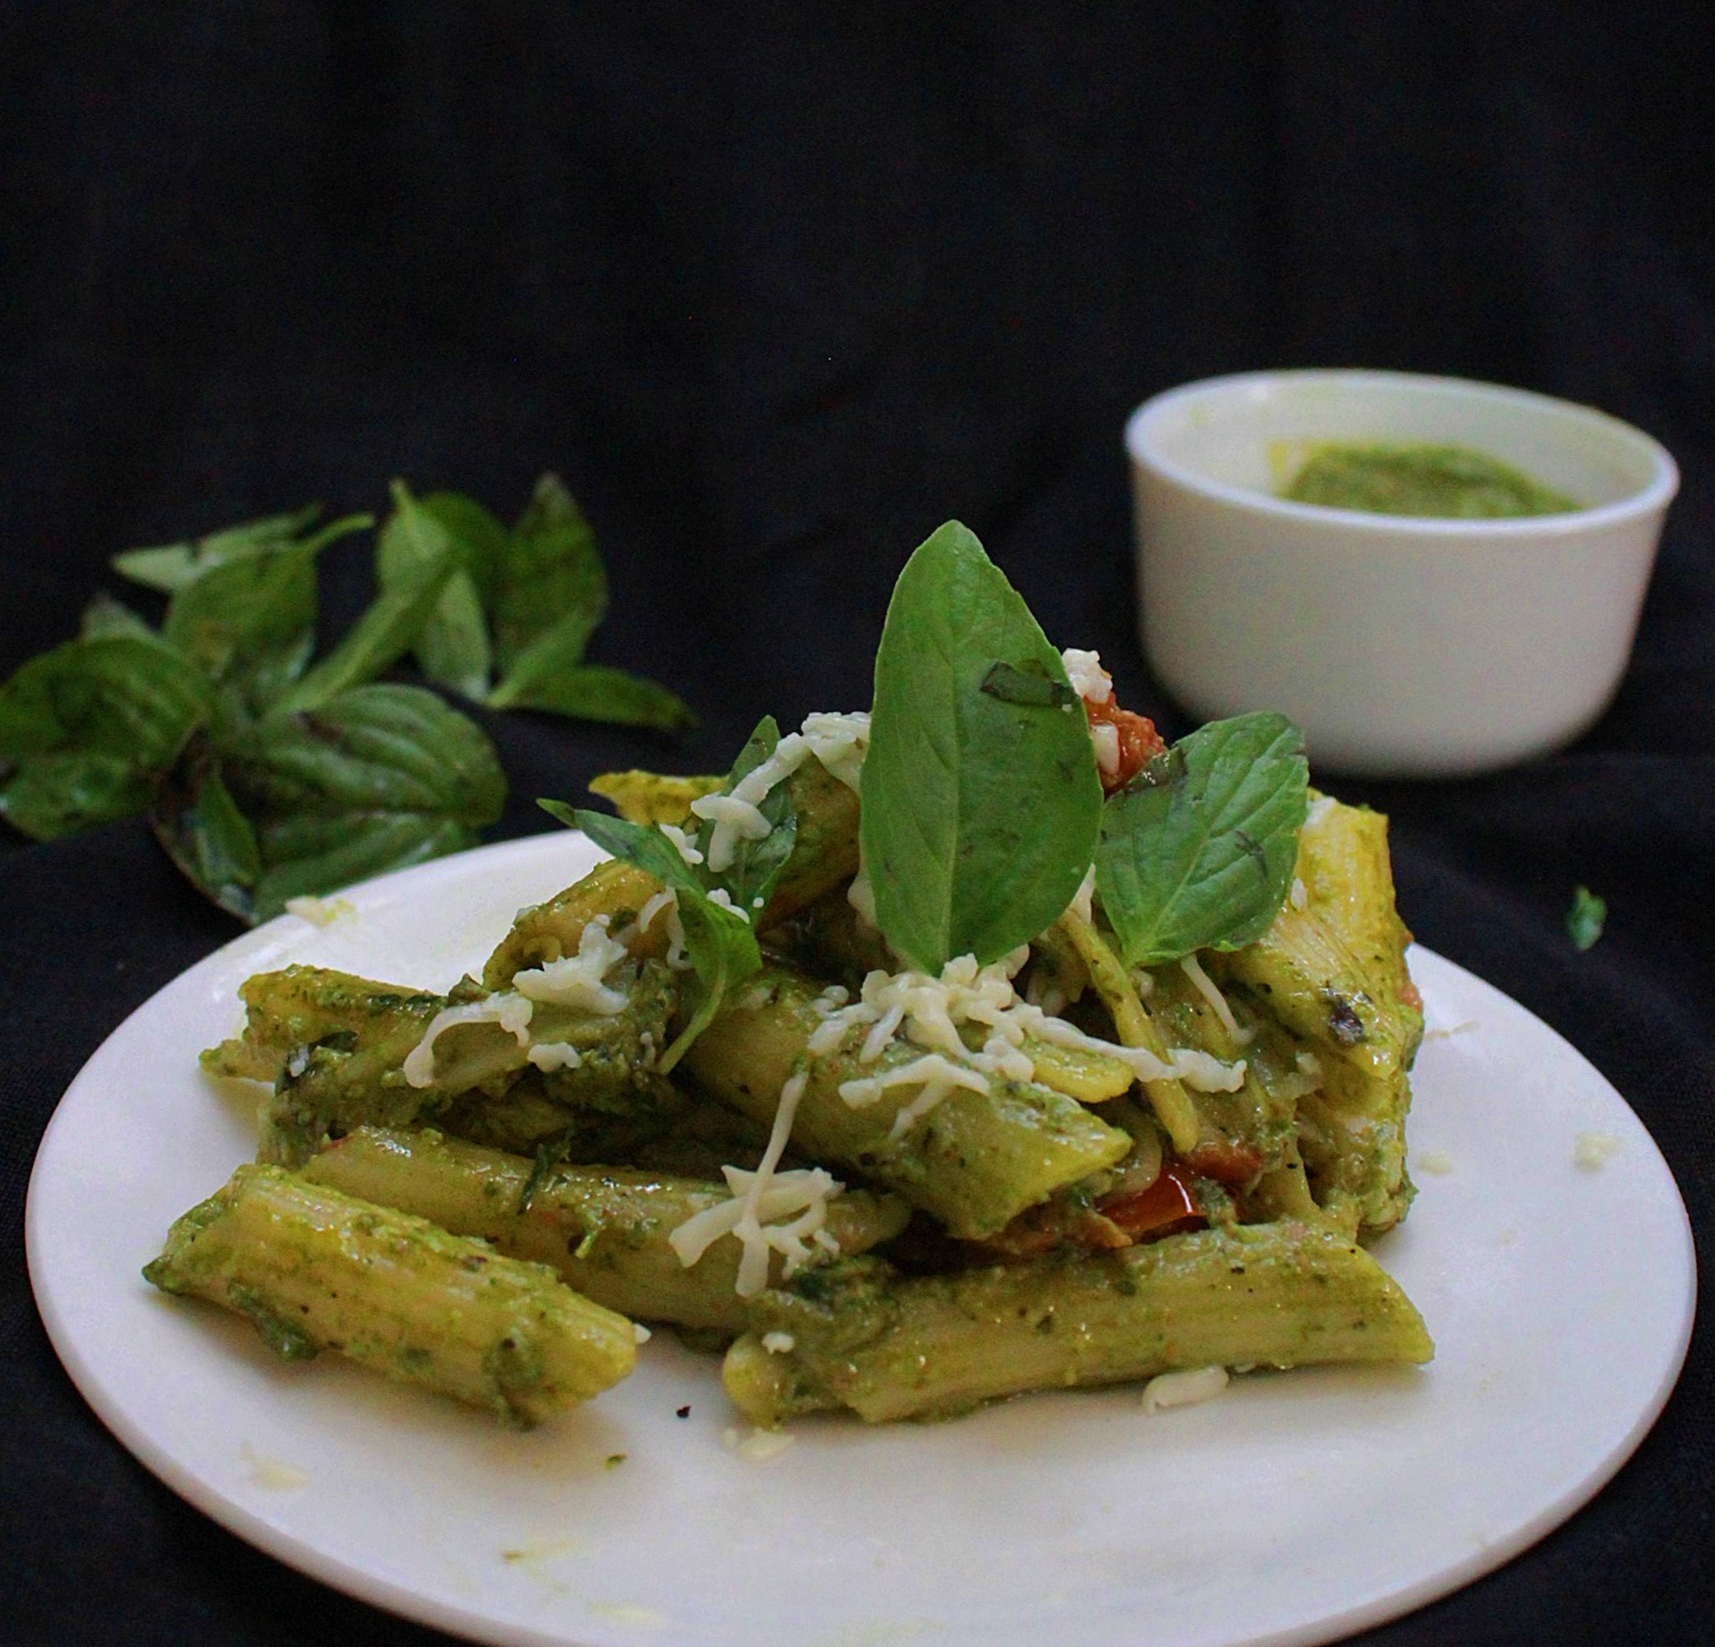 Penne Pasta with Pesto, garnished with cheese and basil leaves.